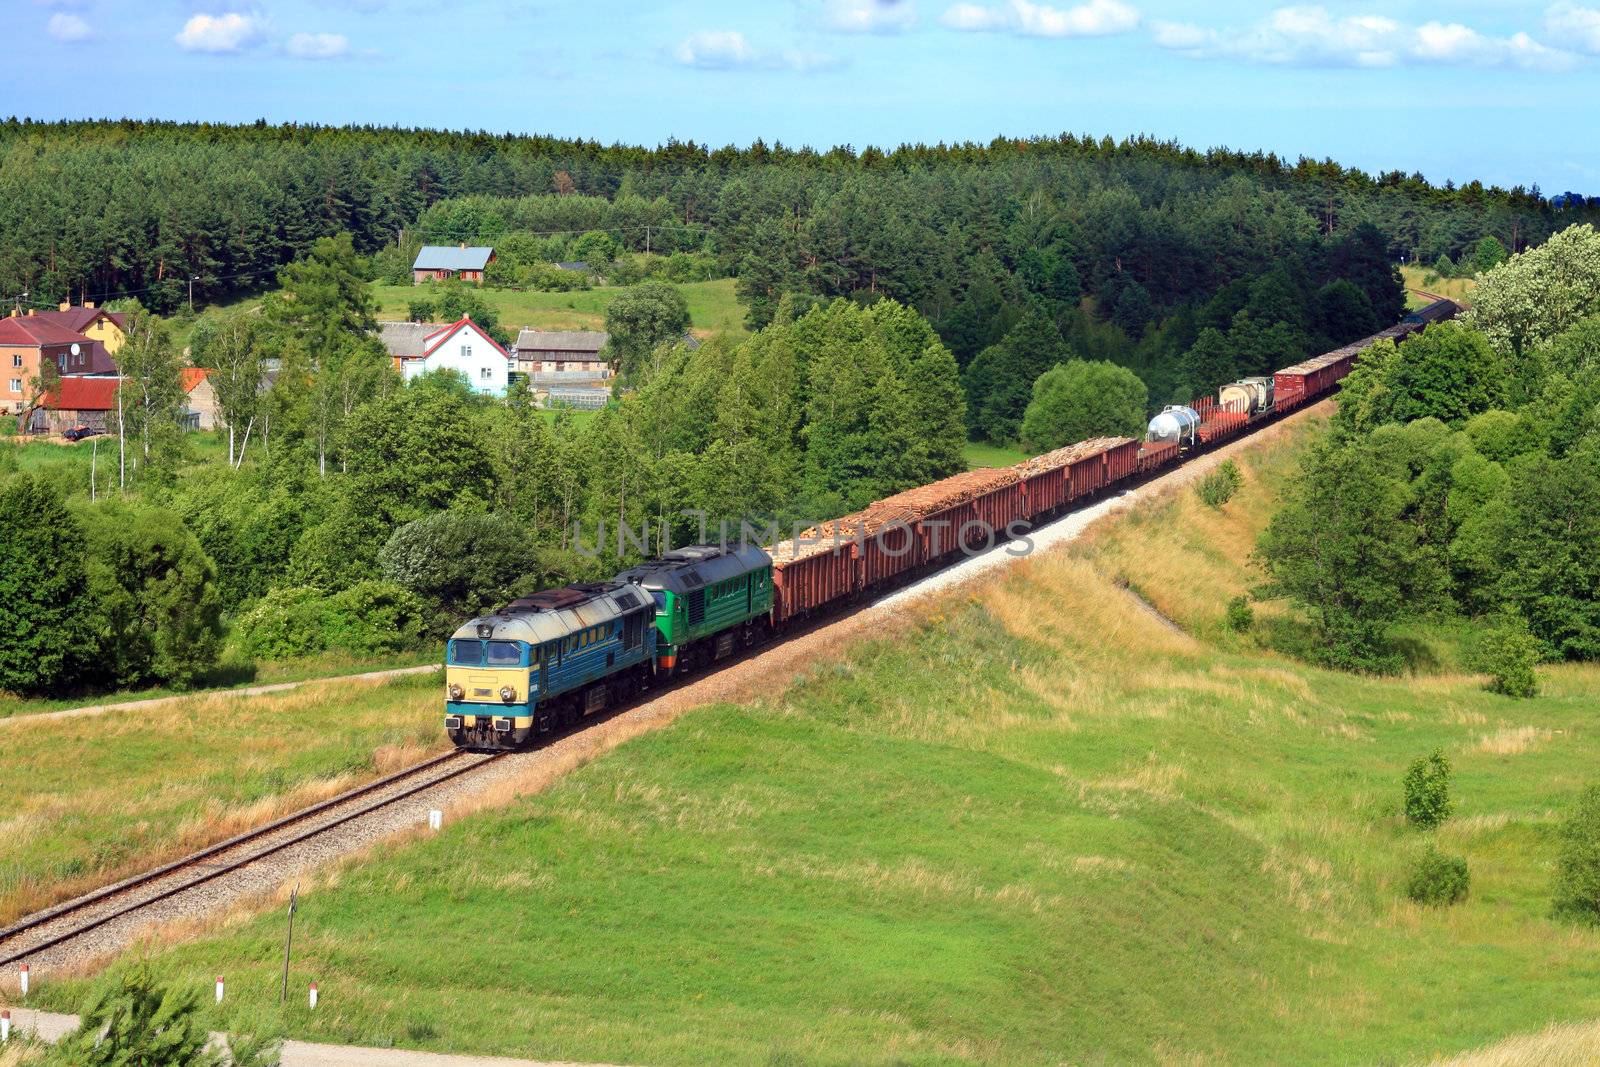 Rural summer landscape with freight train hauled by two diesel locomotives running through the countryside